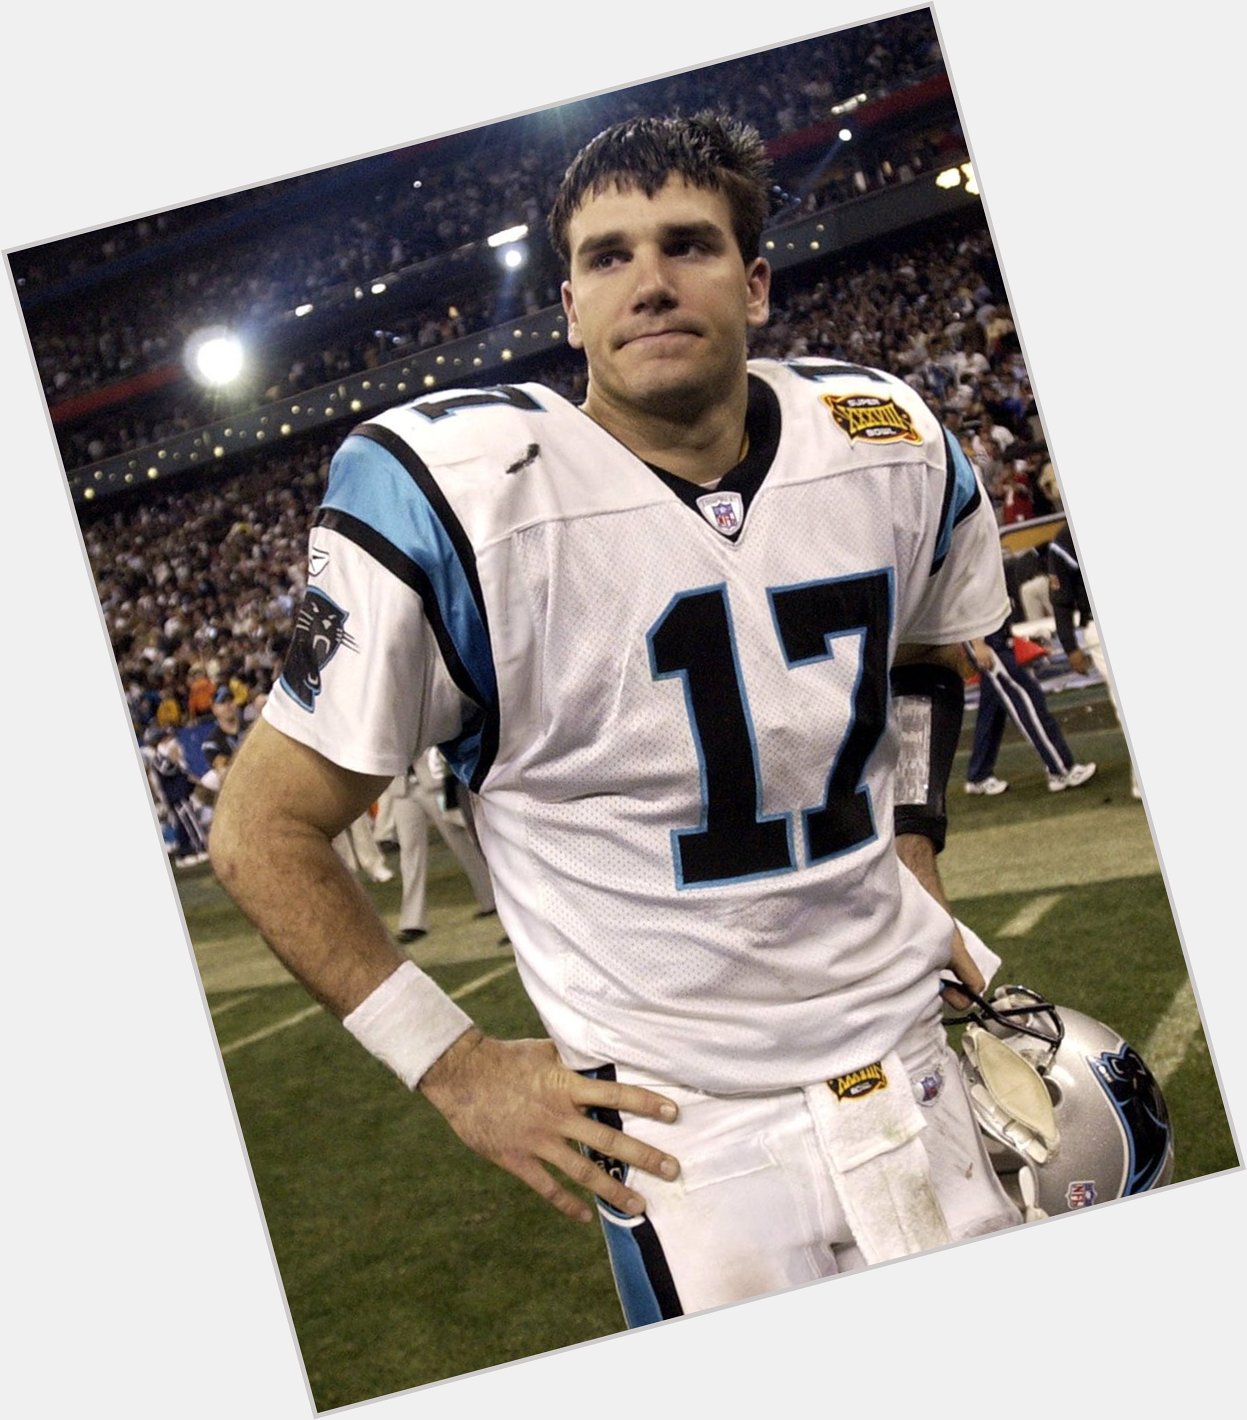 Happy 43rd birthday to former Panthers QB Jake Delhomme! 